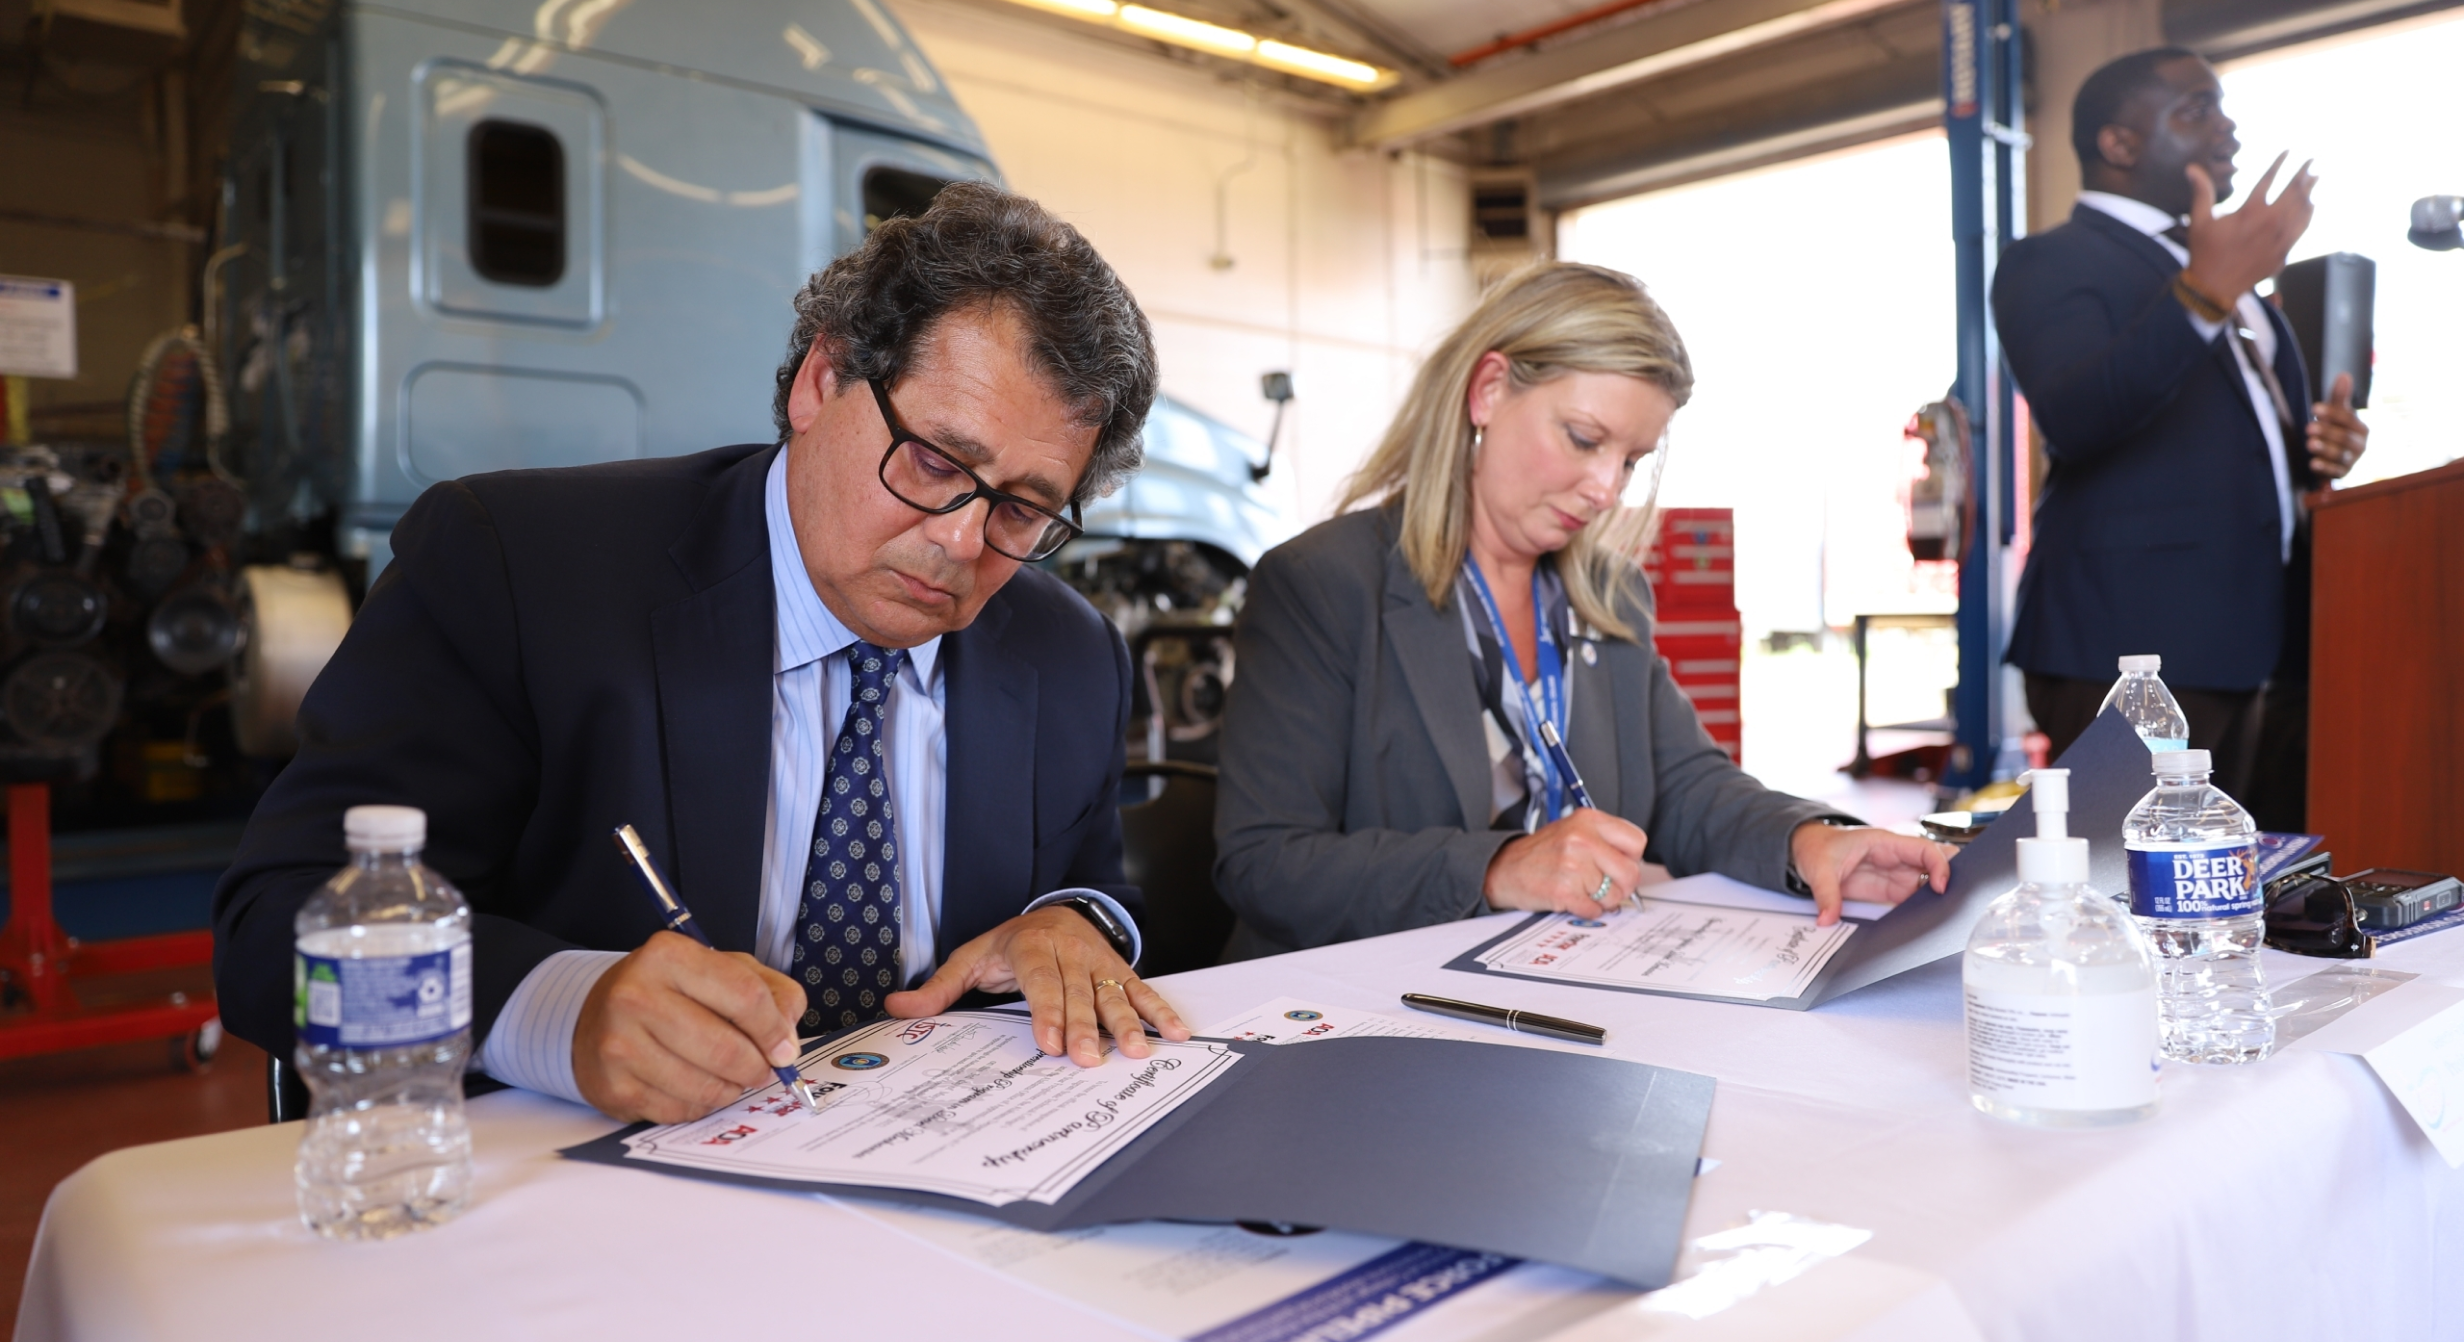 Ingram State Partners With Four Star Freightliner for Apprenticeship